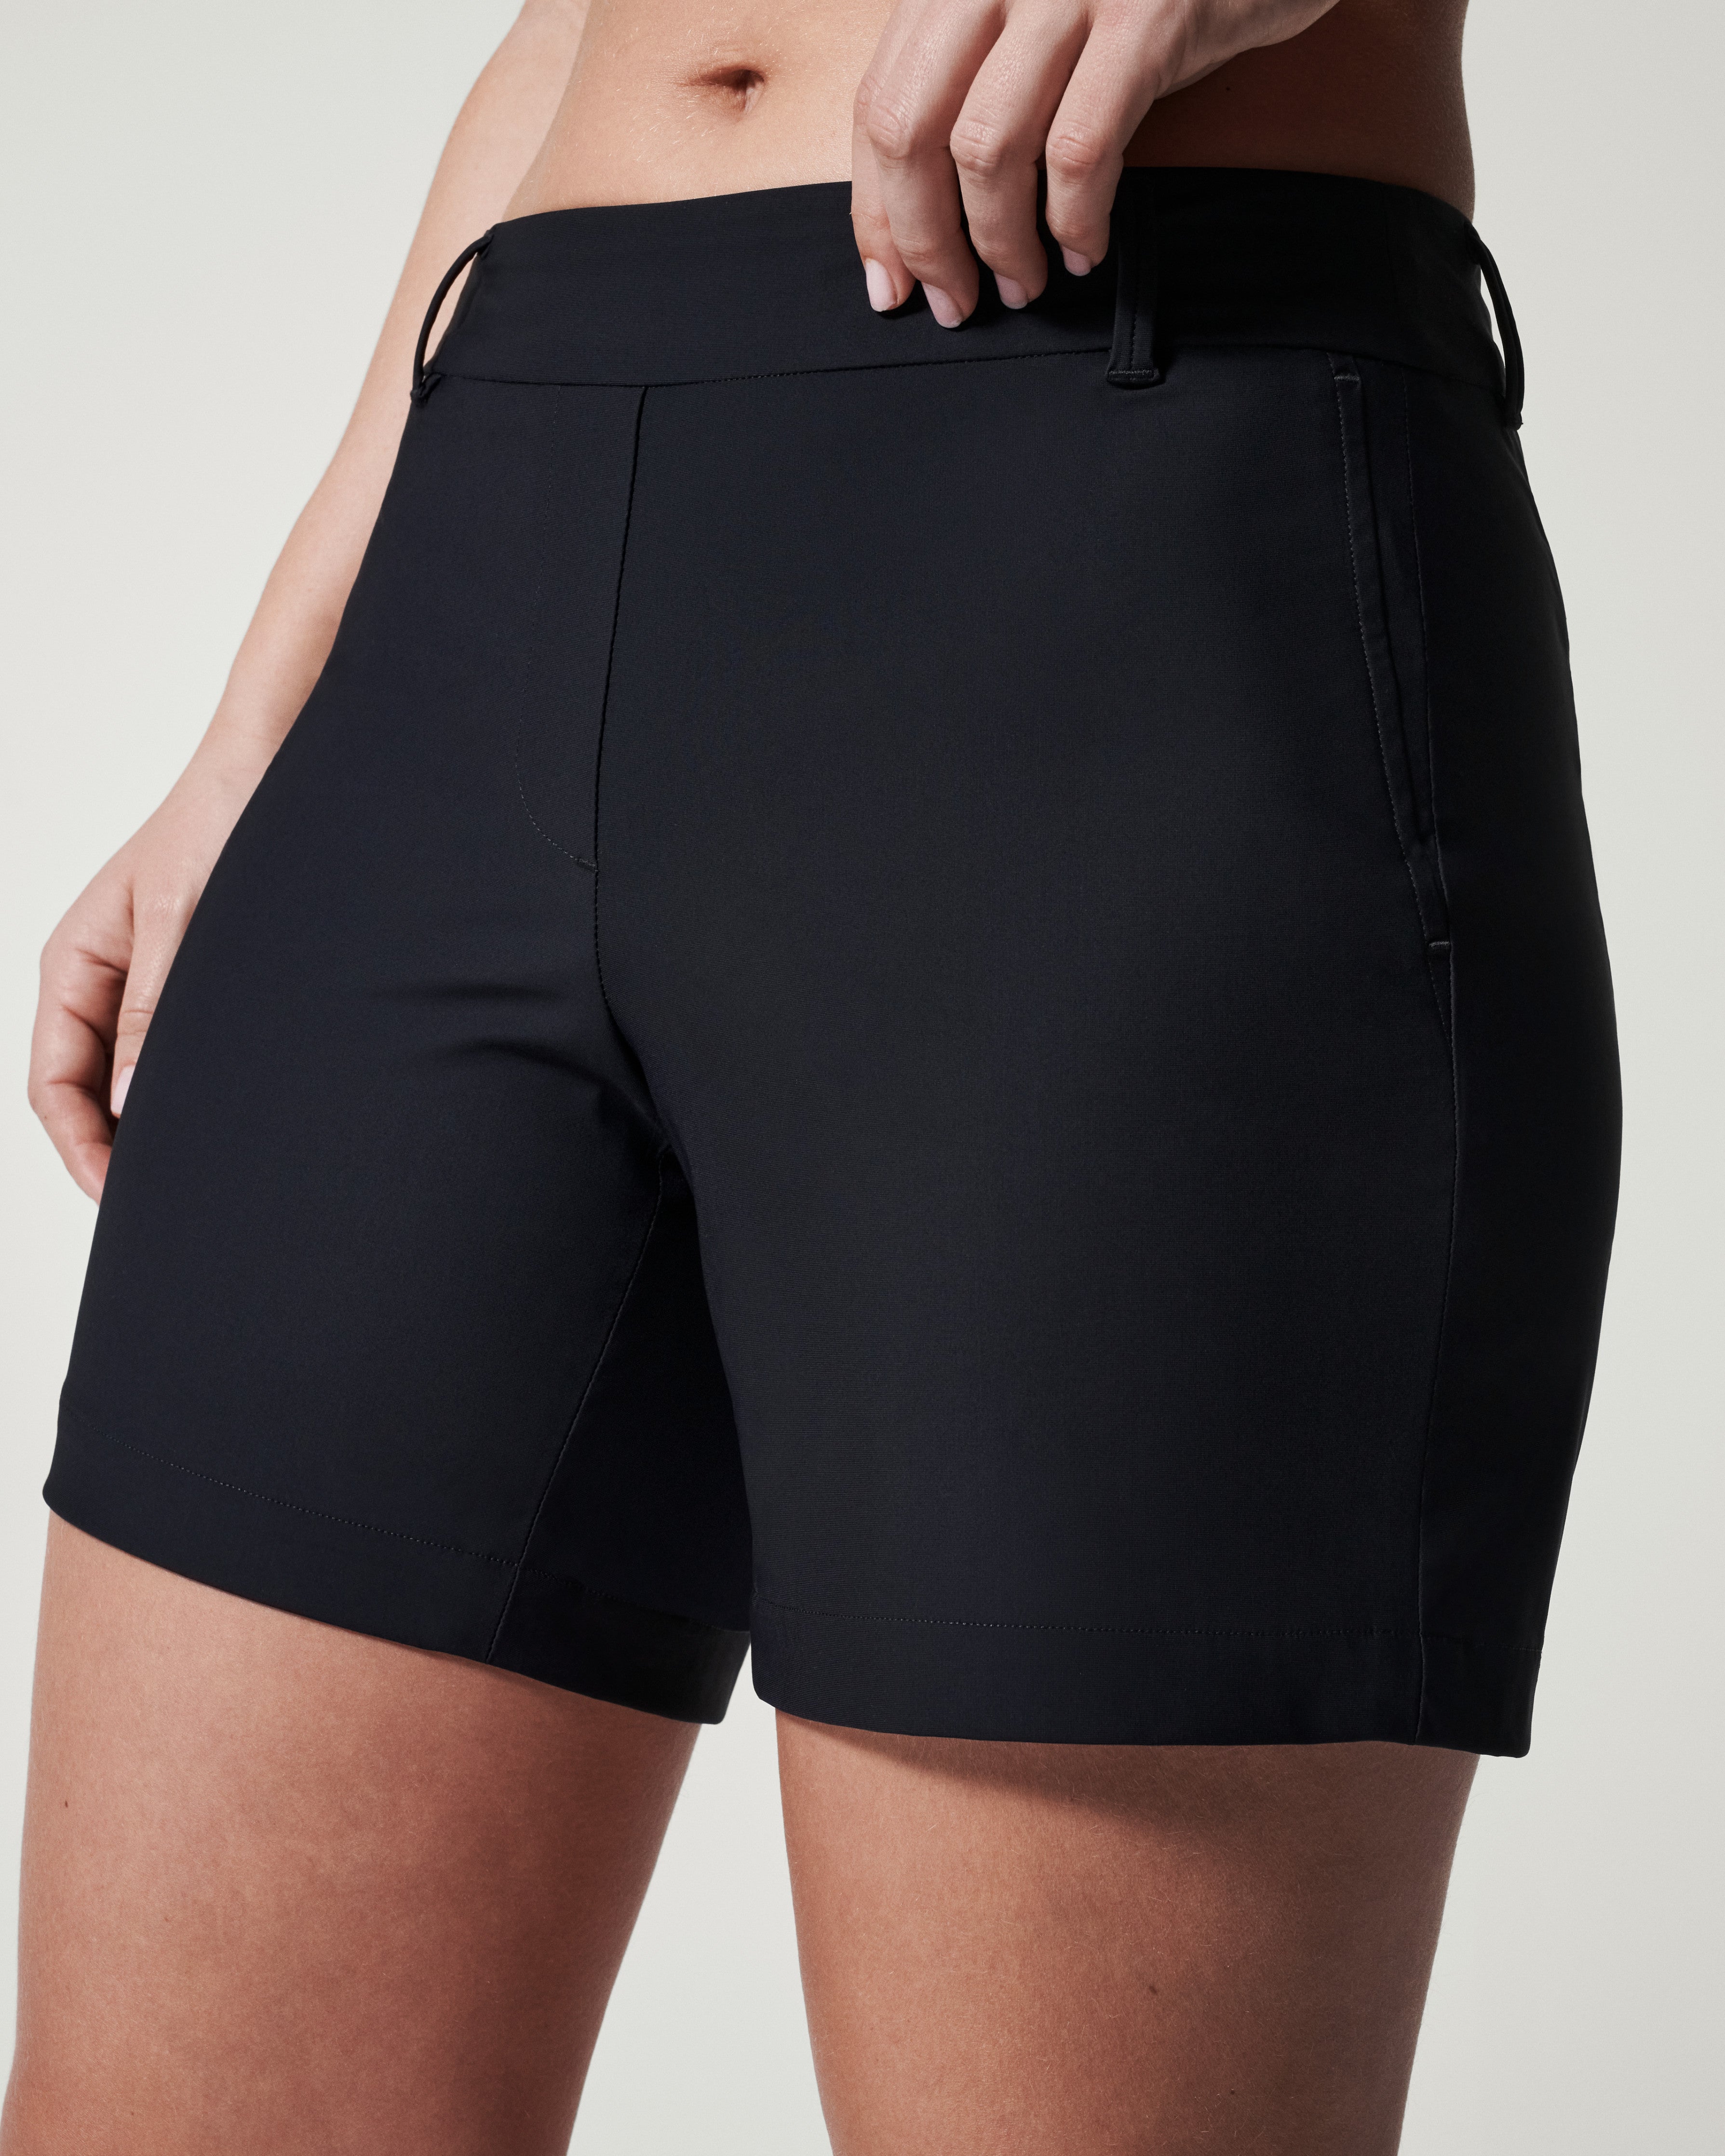 New Spanx Power Short #A303964 Shaping Shorts size Xl Black New 6” Inseam